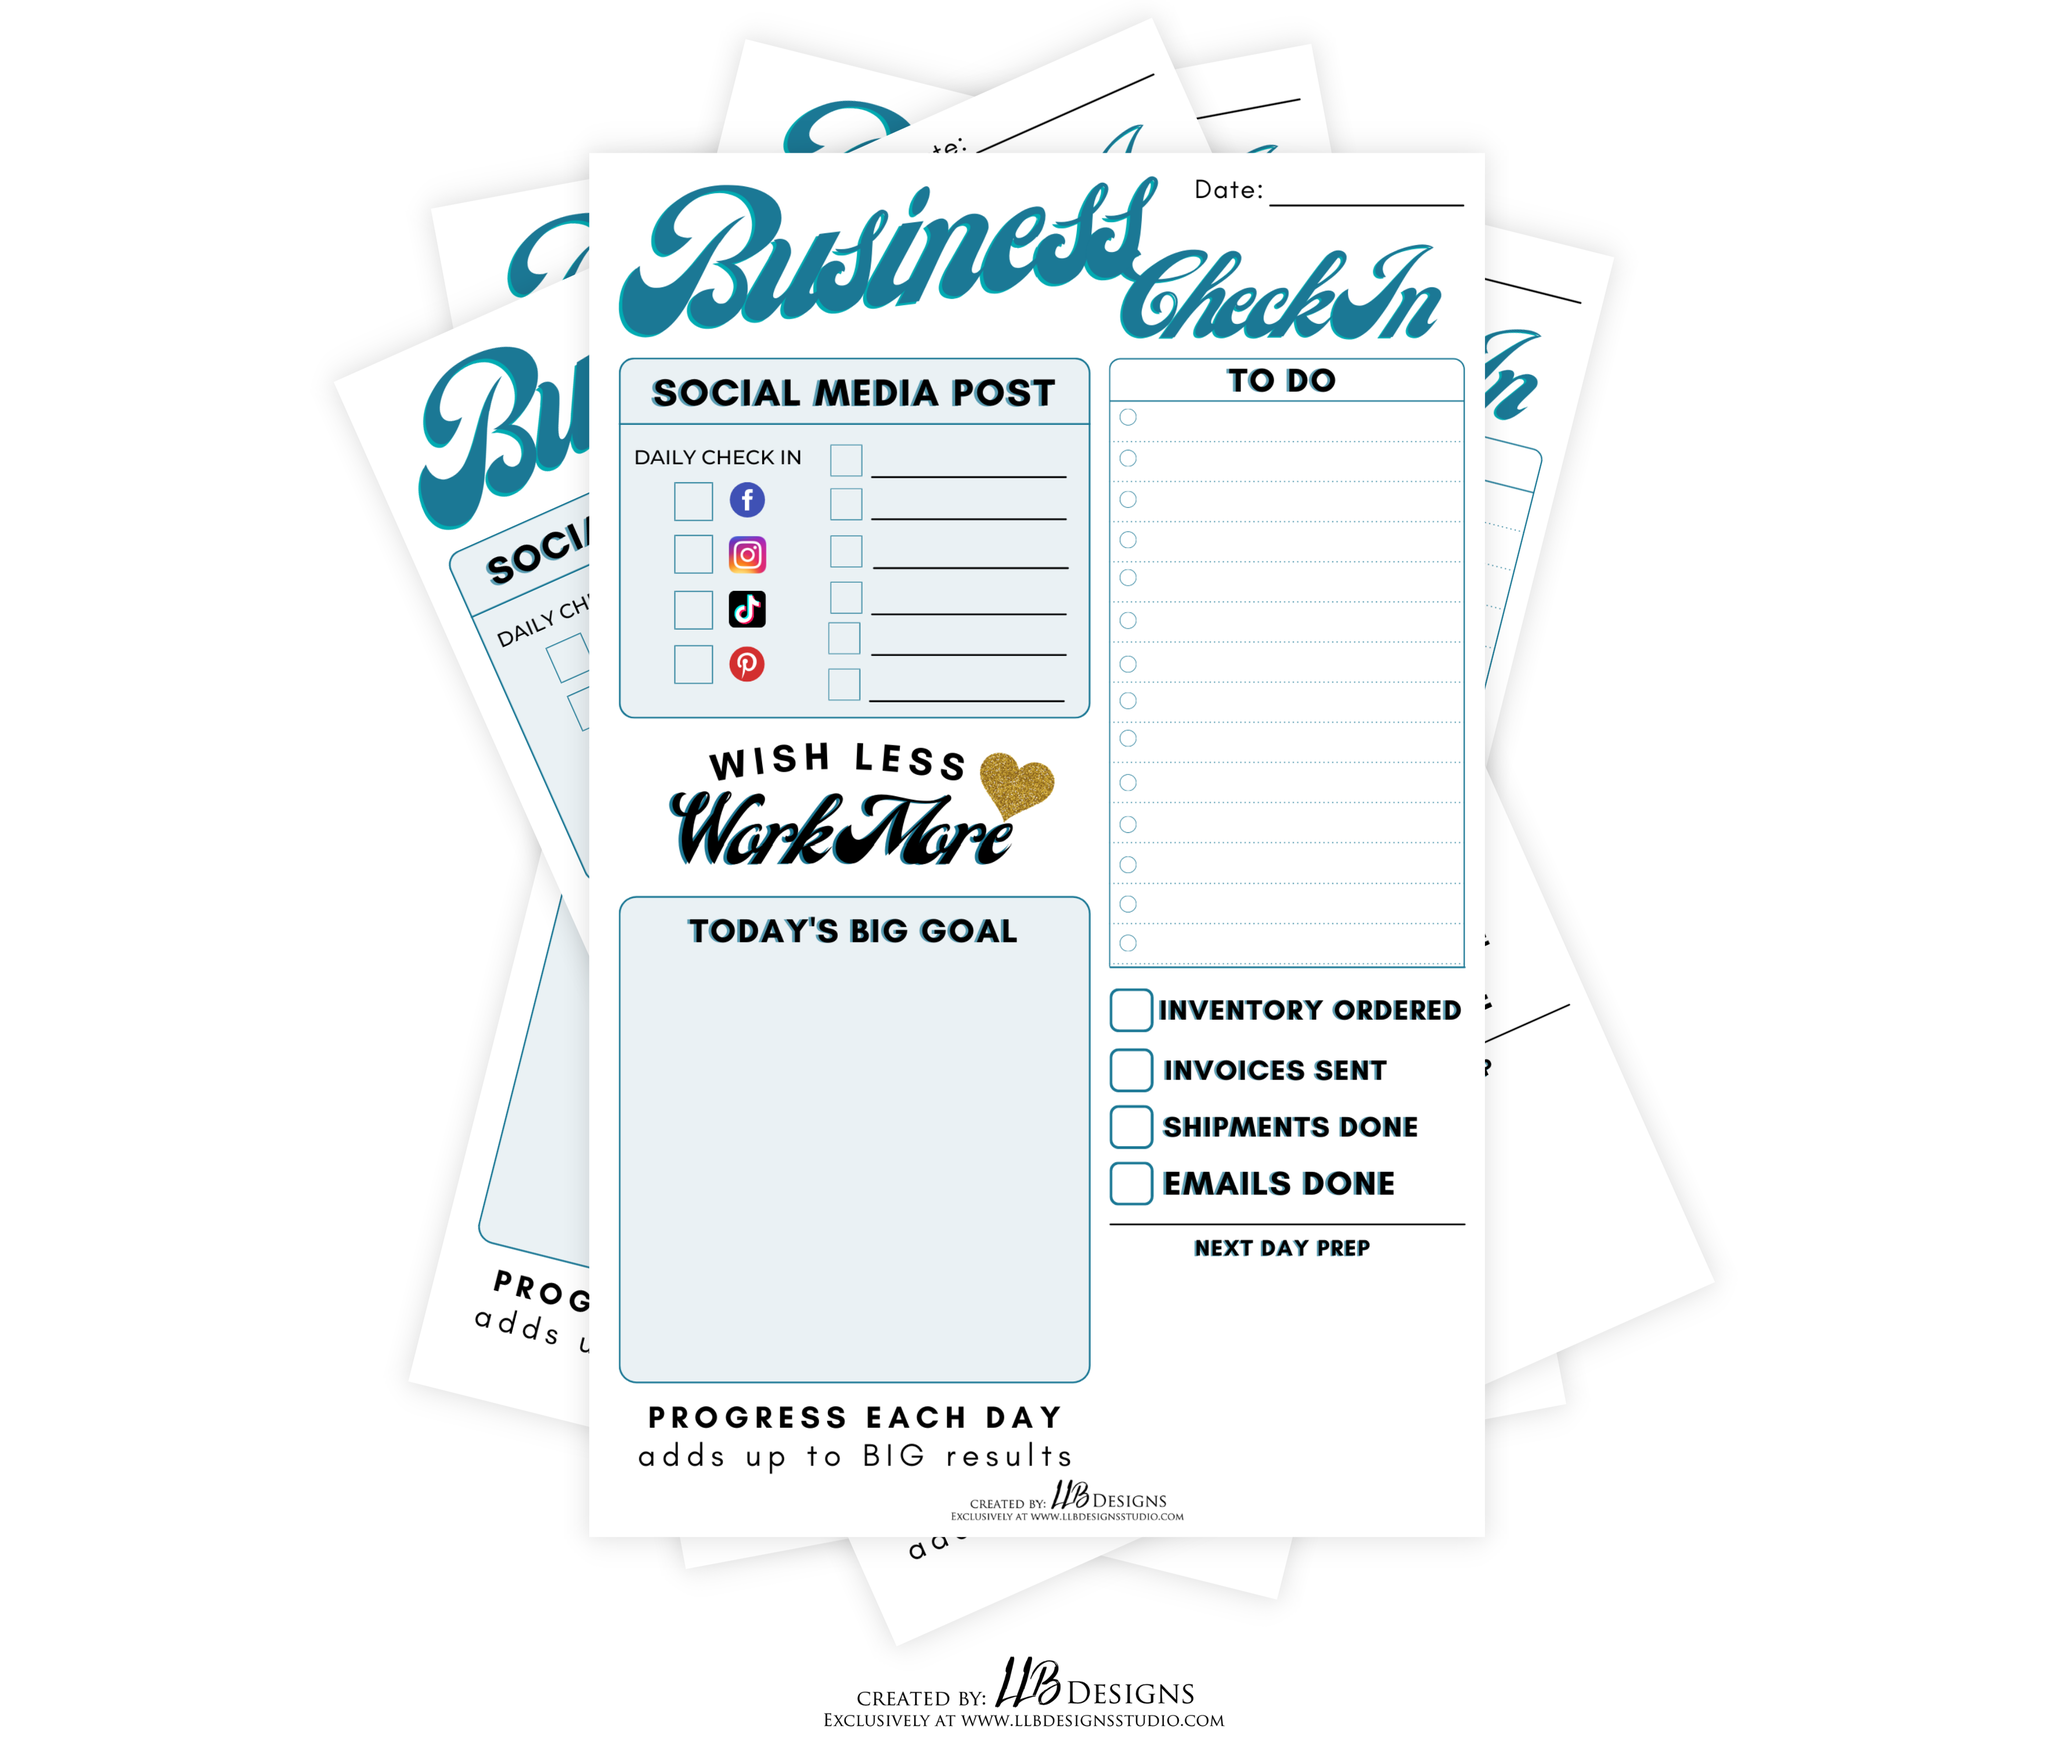 LLB Design Studio - Business Check-in Notepad